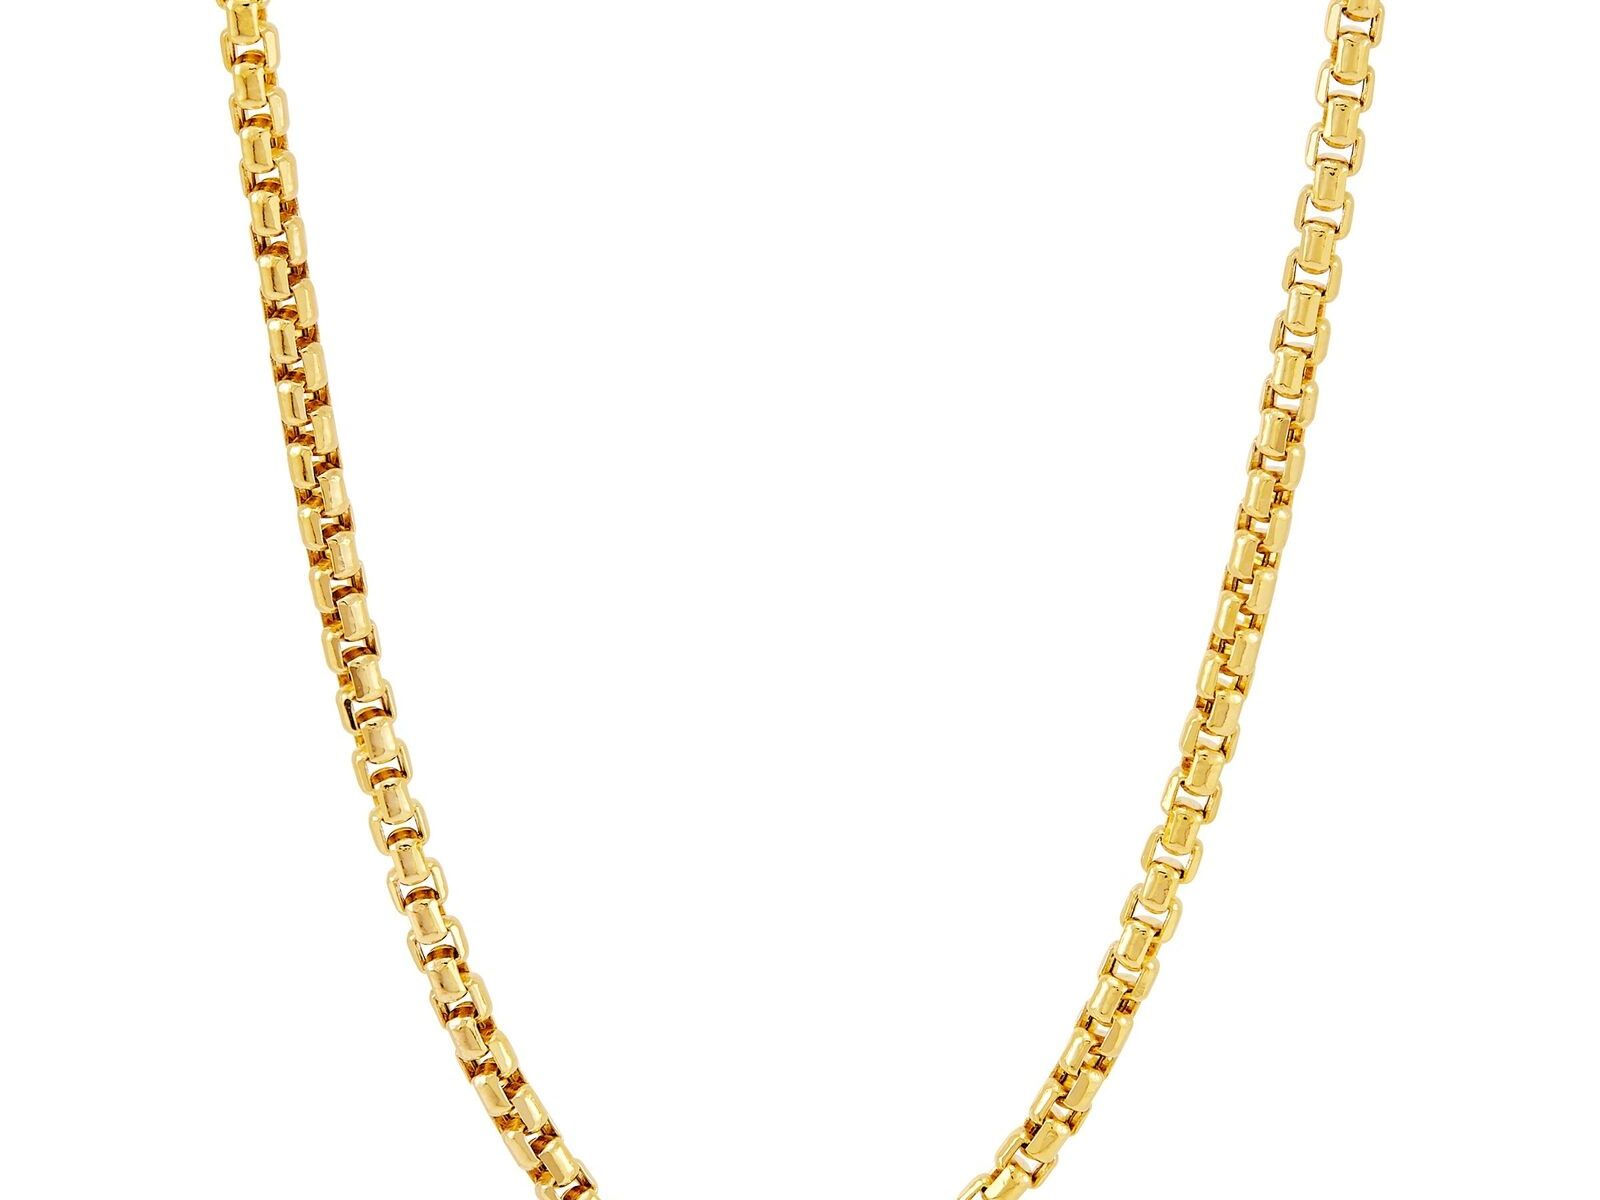 Italian-Made 2.4 mm Round Box Chain Necklace in 14K Gold, 22"